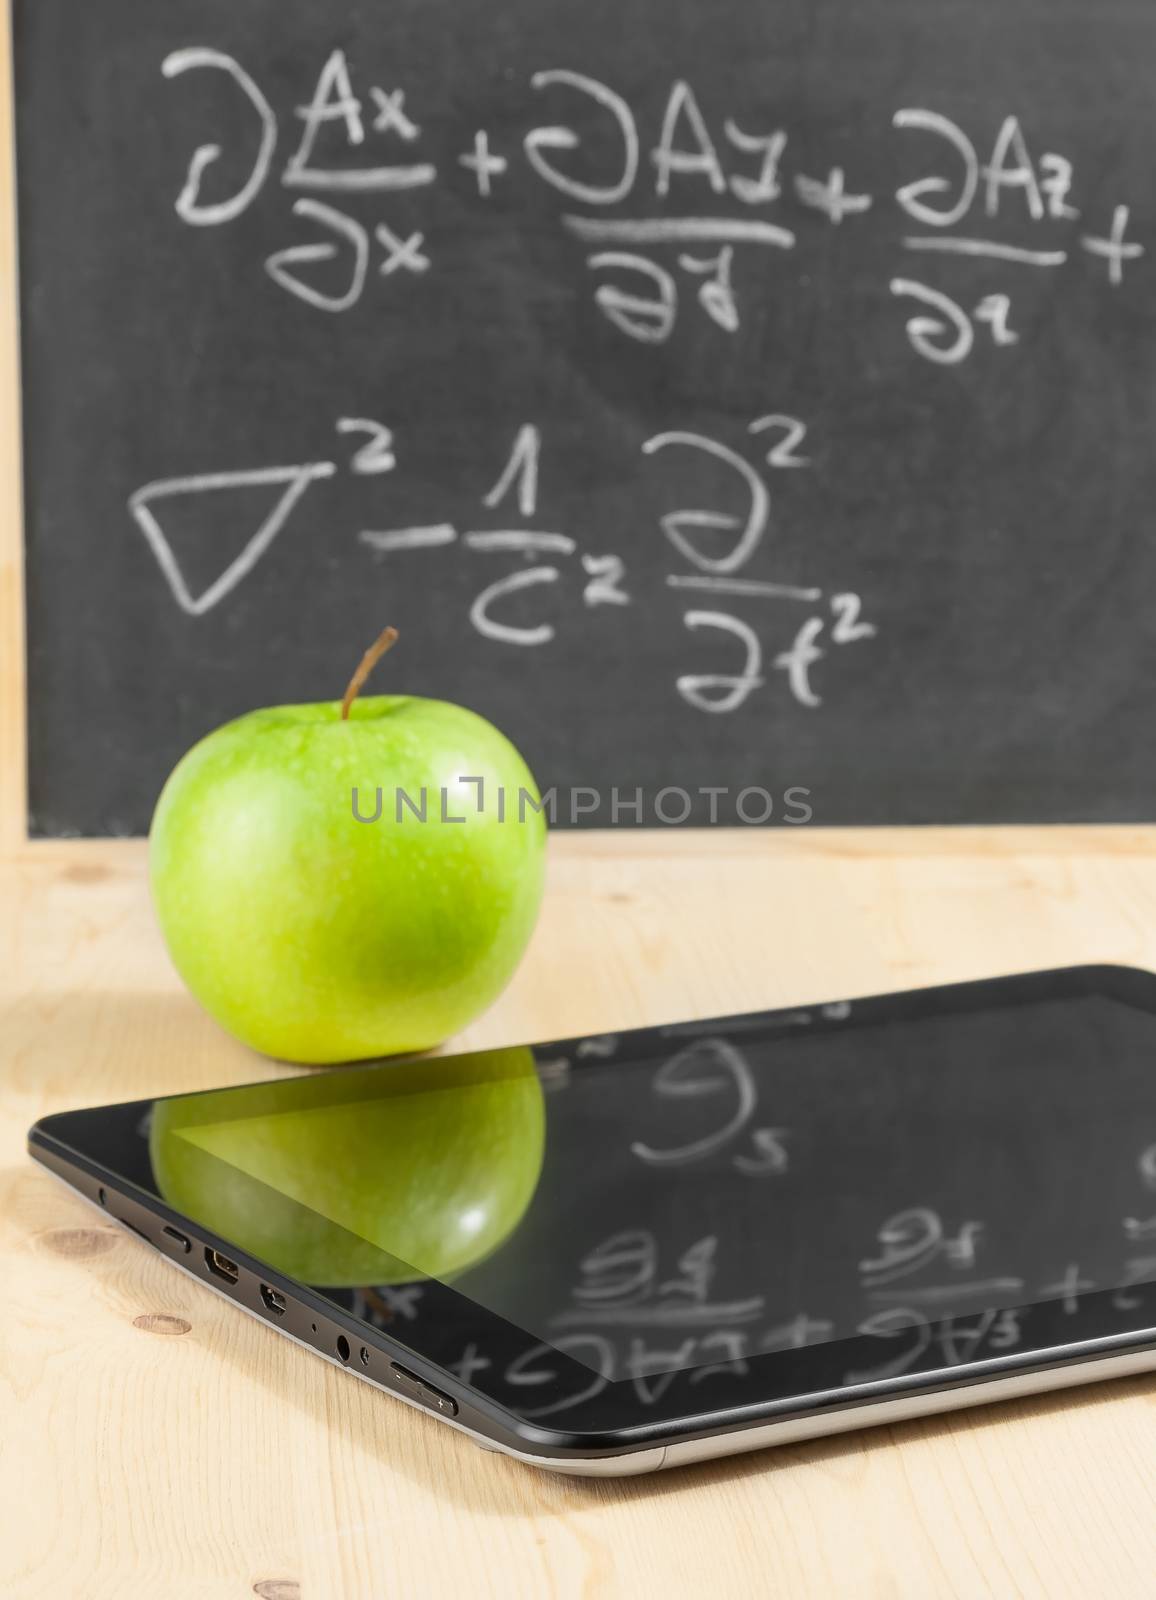 tablet pc and green apple in front of blackboard on wood table, concept of learn new technology